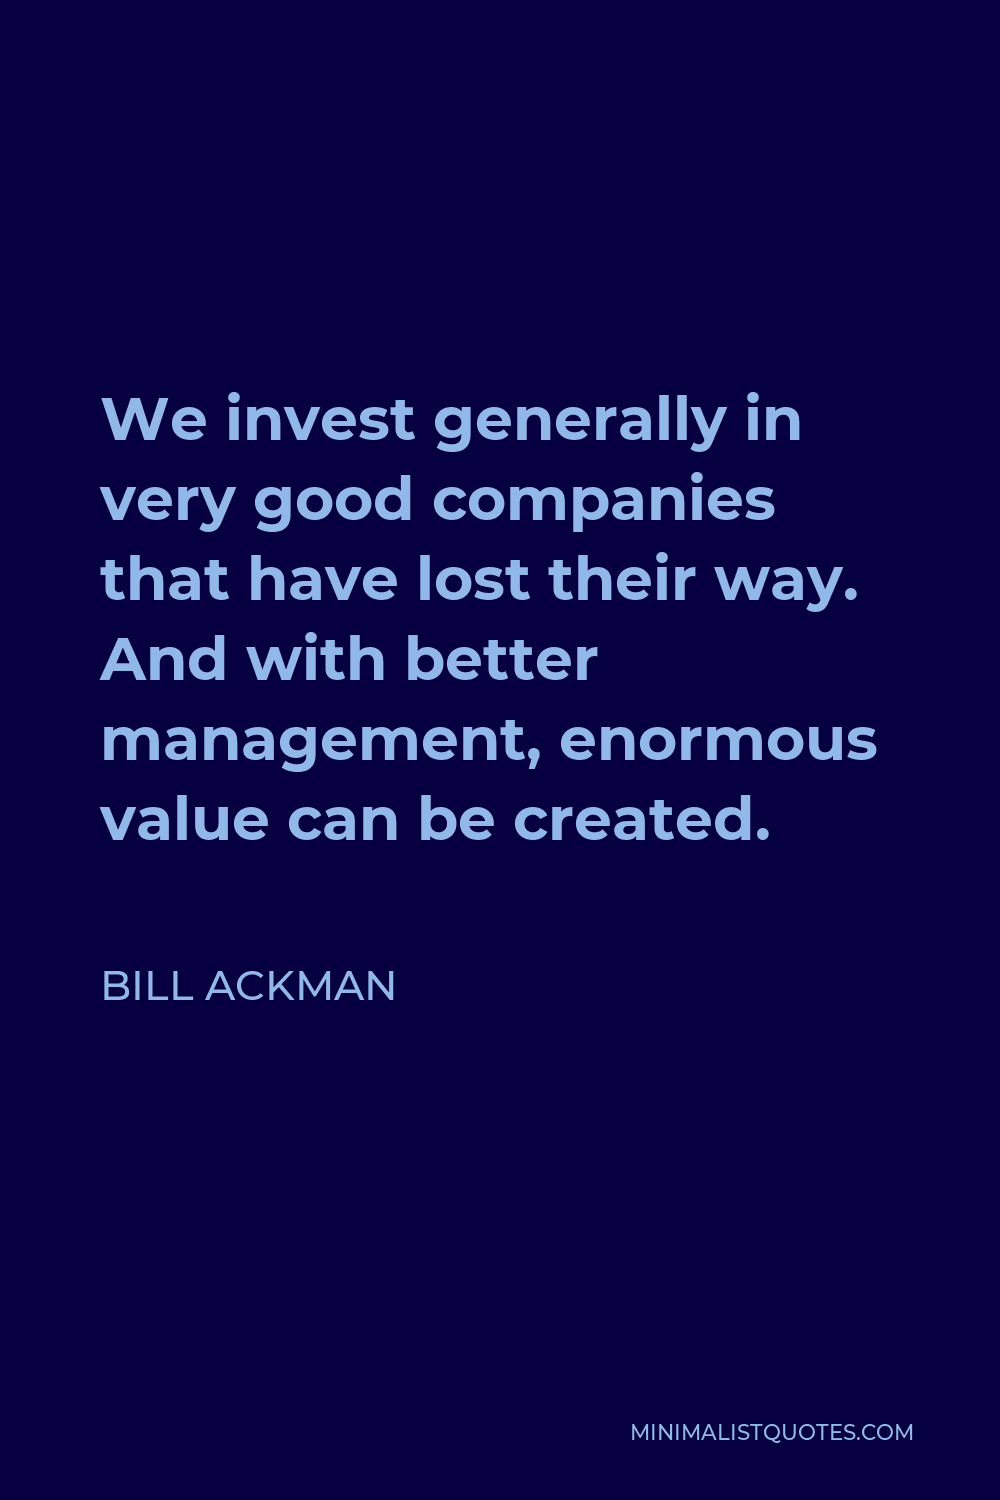 Bill Ackman Quote - We invest generally in very good companies that have lost their way. And with better management, enormous value can be created.